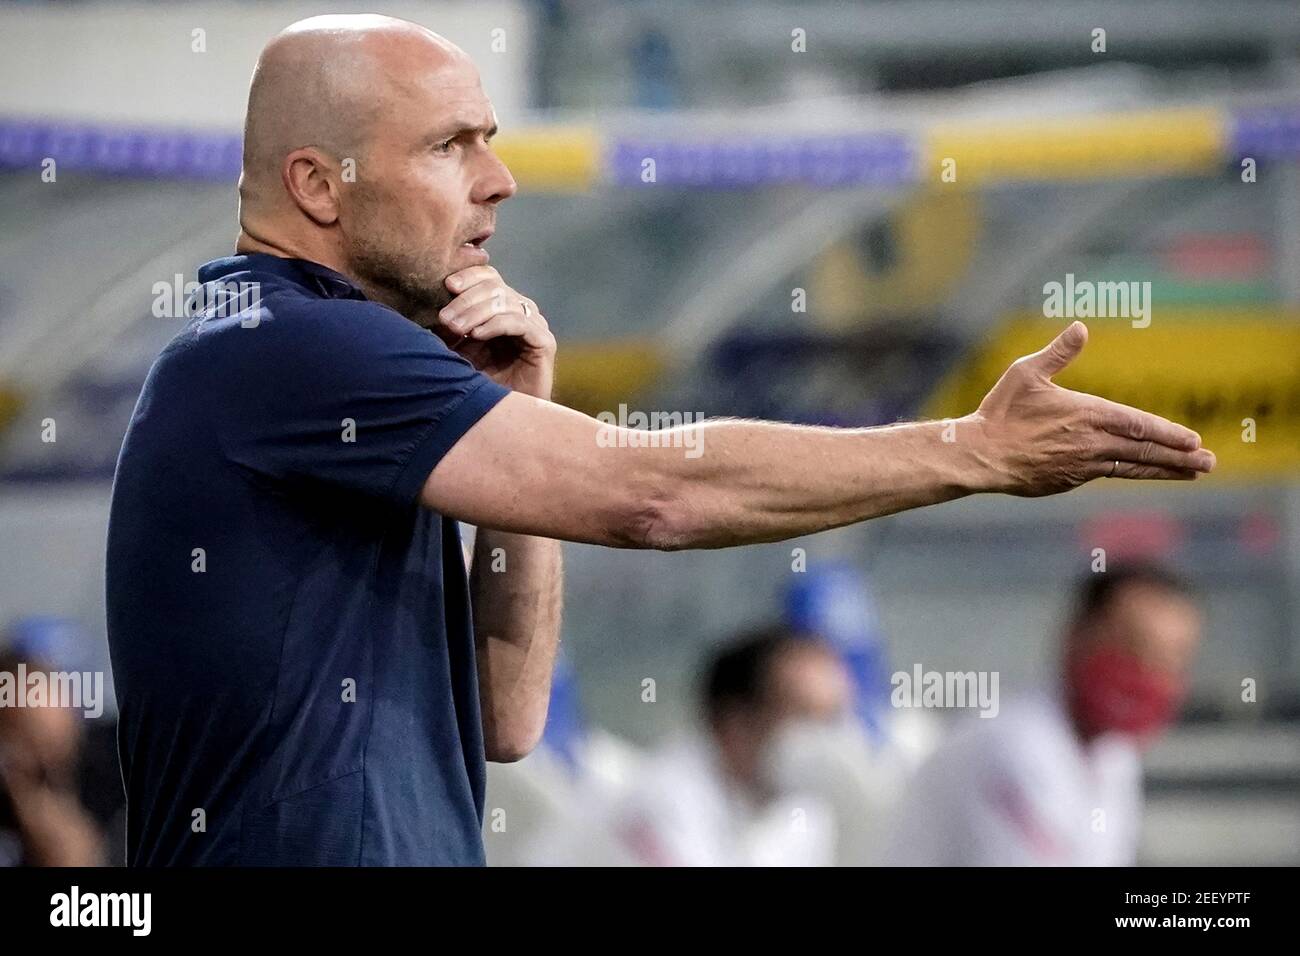 Soccer Football - Bundesliga - TSG 1899 Hoffenheim v FC Cologne - PreZero Arena, Sinsheim, Germany - May 27, 2020  TSG 1899 Hoffenheim coach Alfred Schreuder reacts during the match, as play resumes following the outbreak of the coronavirus disease (COVID-19) Ronald Wittek/Pool via REUTERS  DFL regulations prohibit any use of photographs as image sequences and/or quasi-video Stock Photo